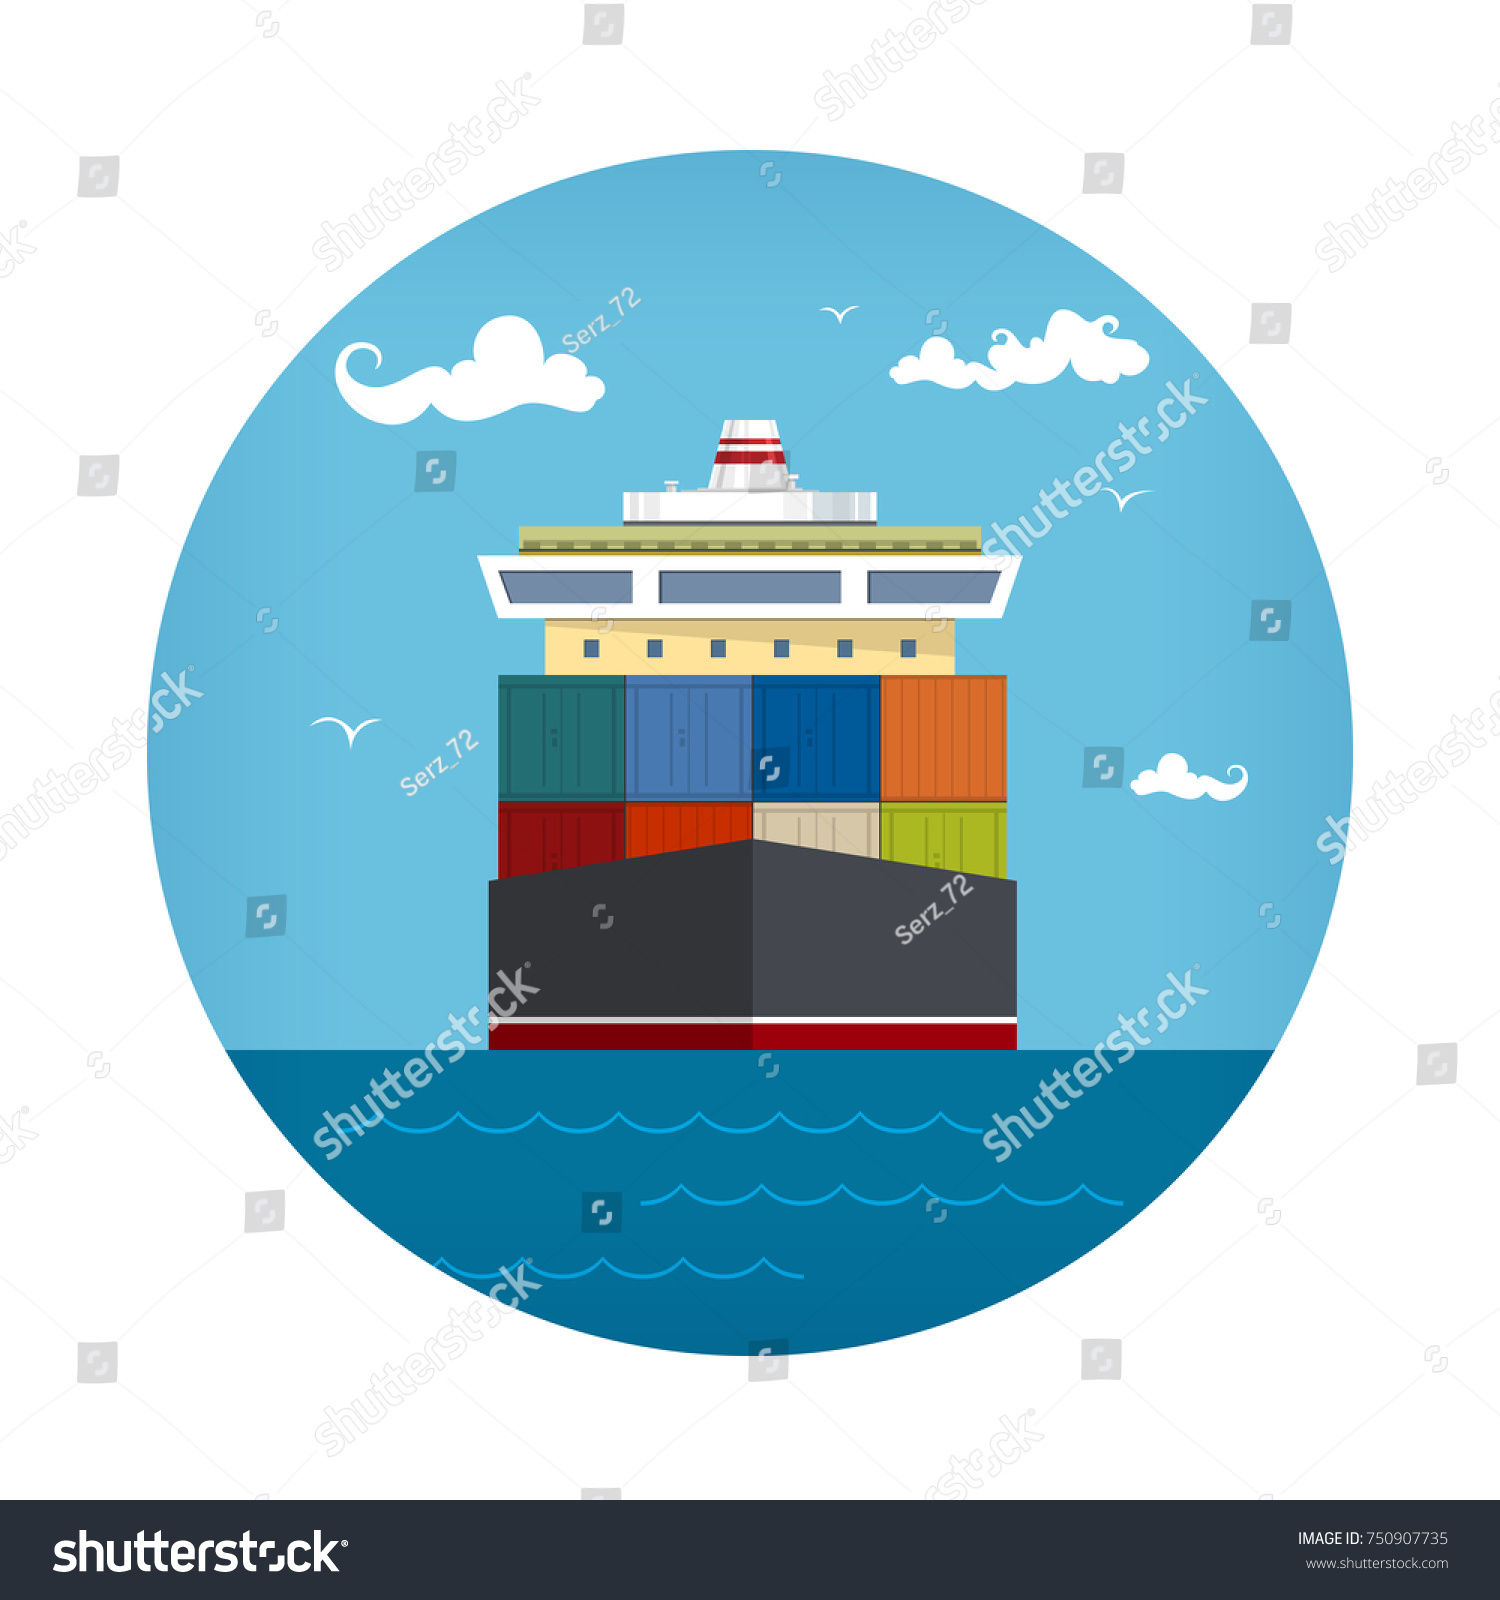 SVG of Front View of the Cargo Container Ship , Industrial Marine Vessel with Containers on Board, International Freight Transportation Icon, Vector Illustration svg